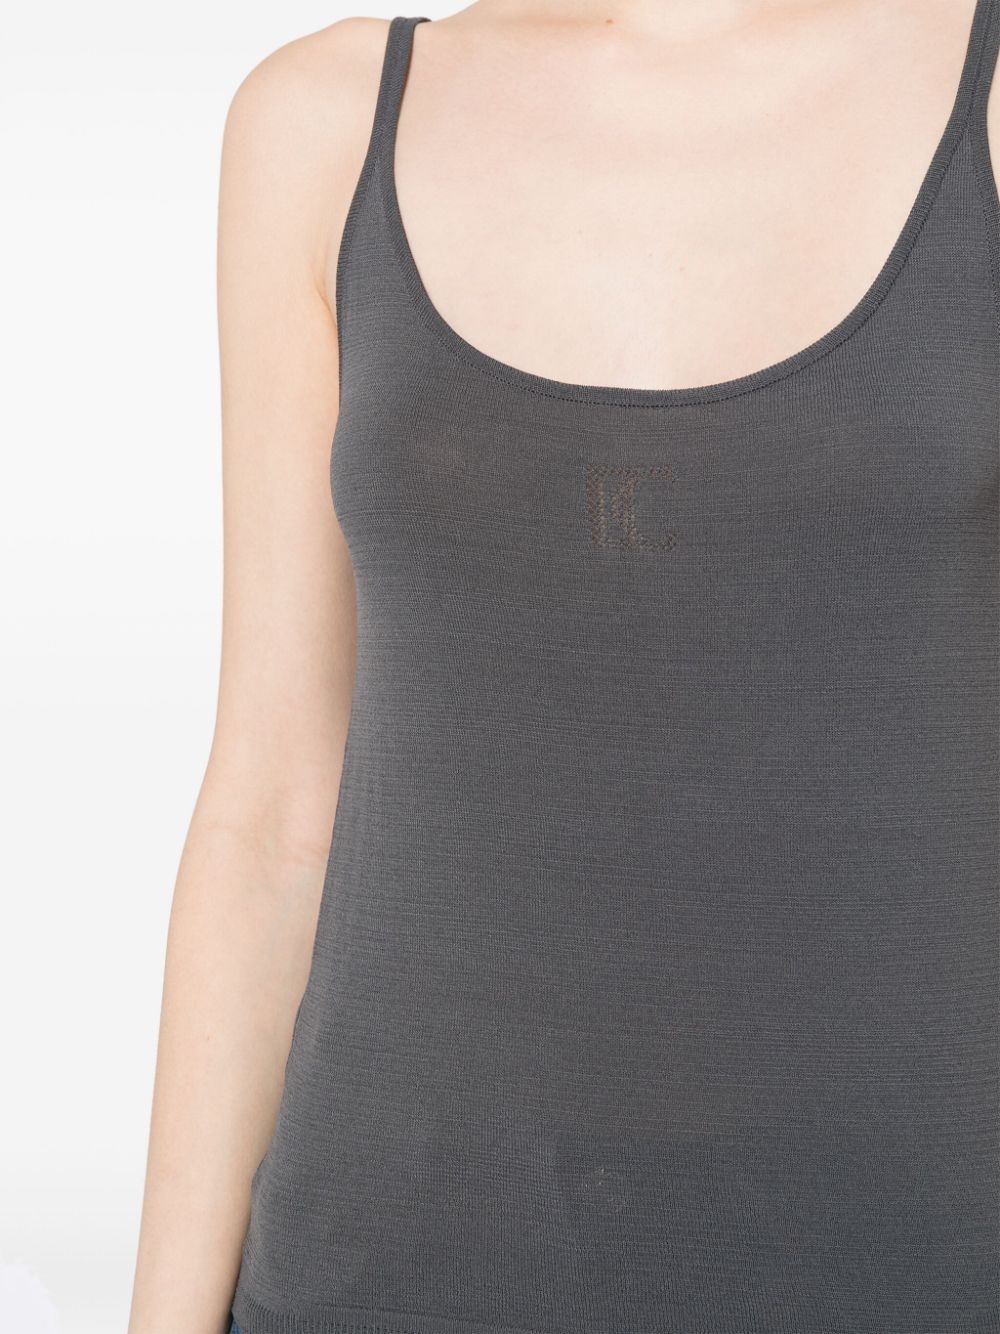 perforated knit tank top - 5